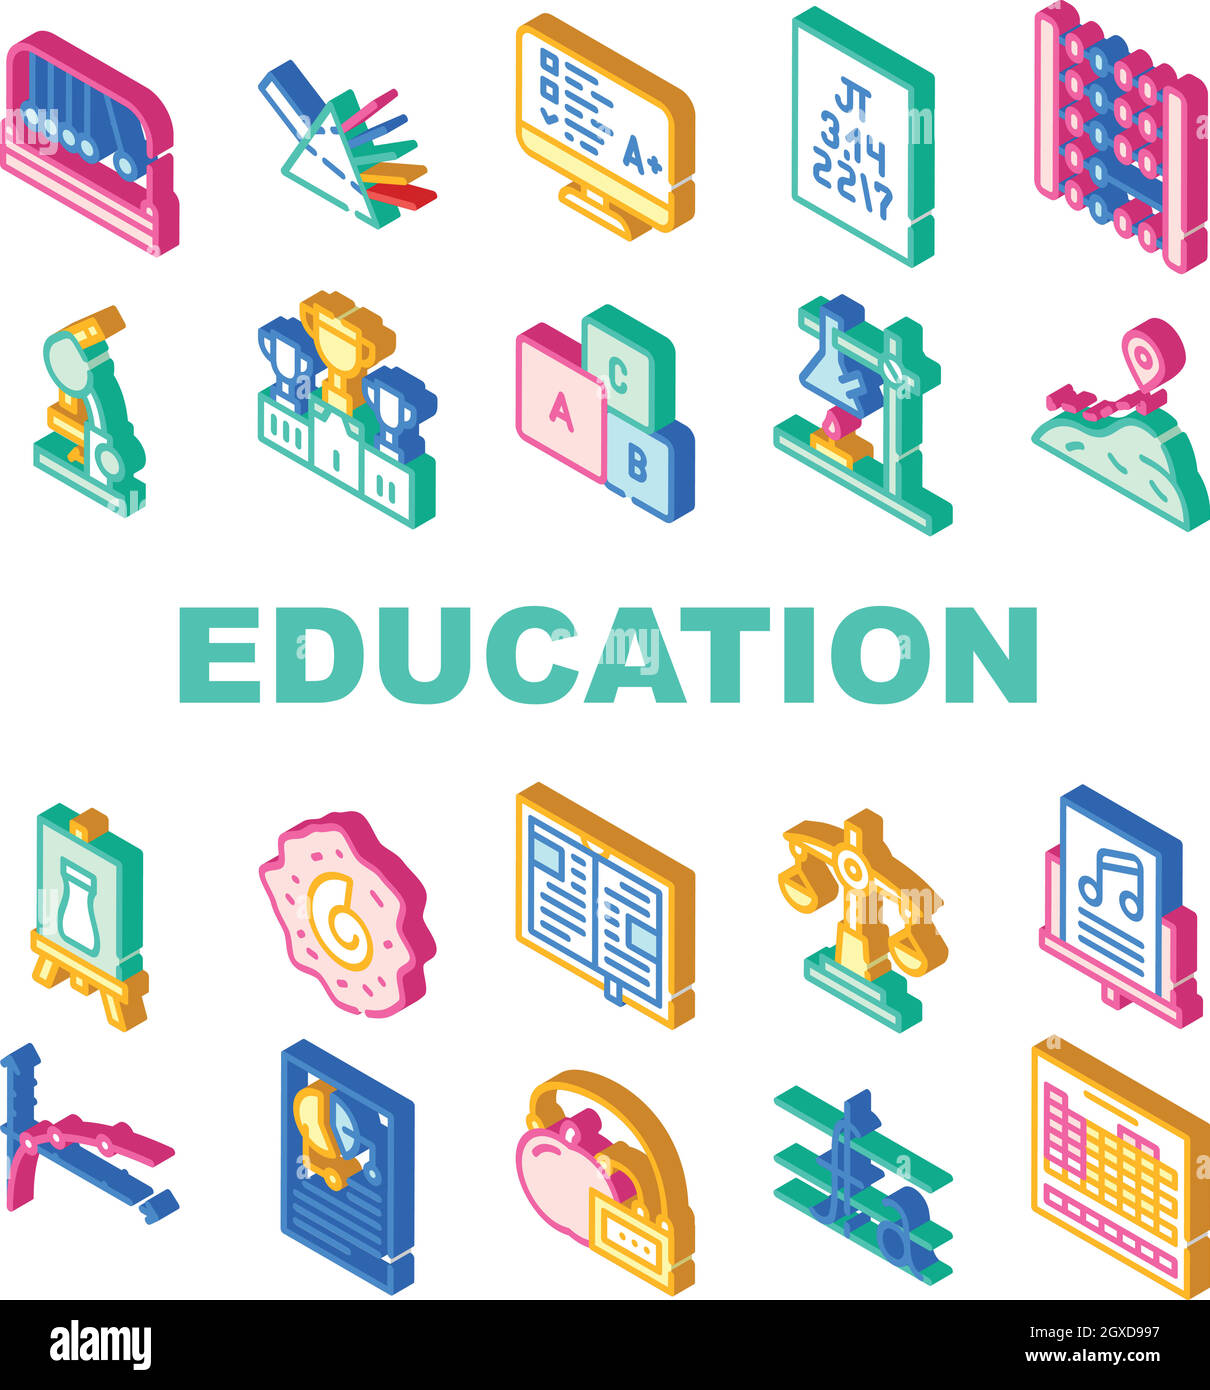 Education Science Collection Icons Set Vector Illustrations Stock Vector